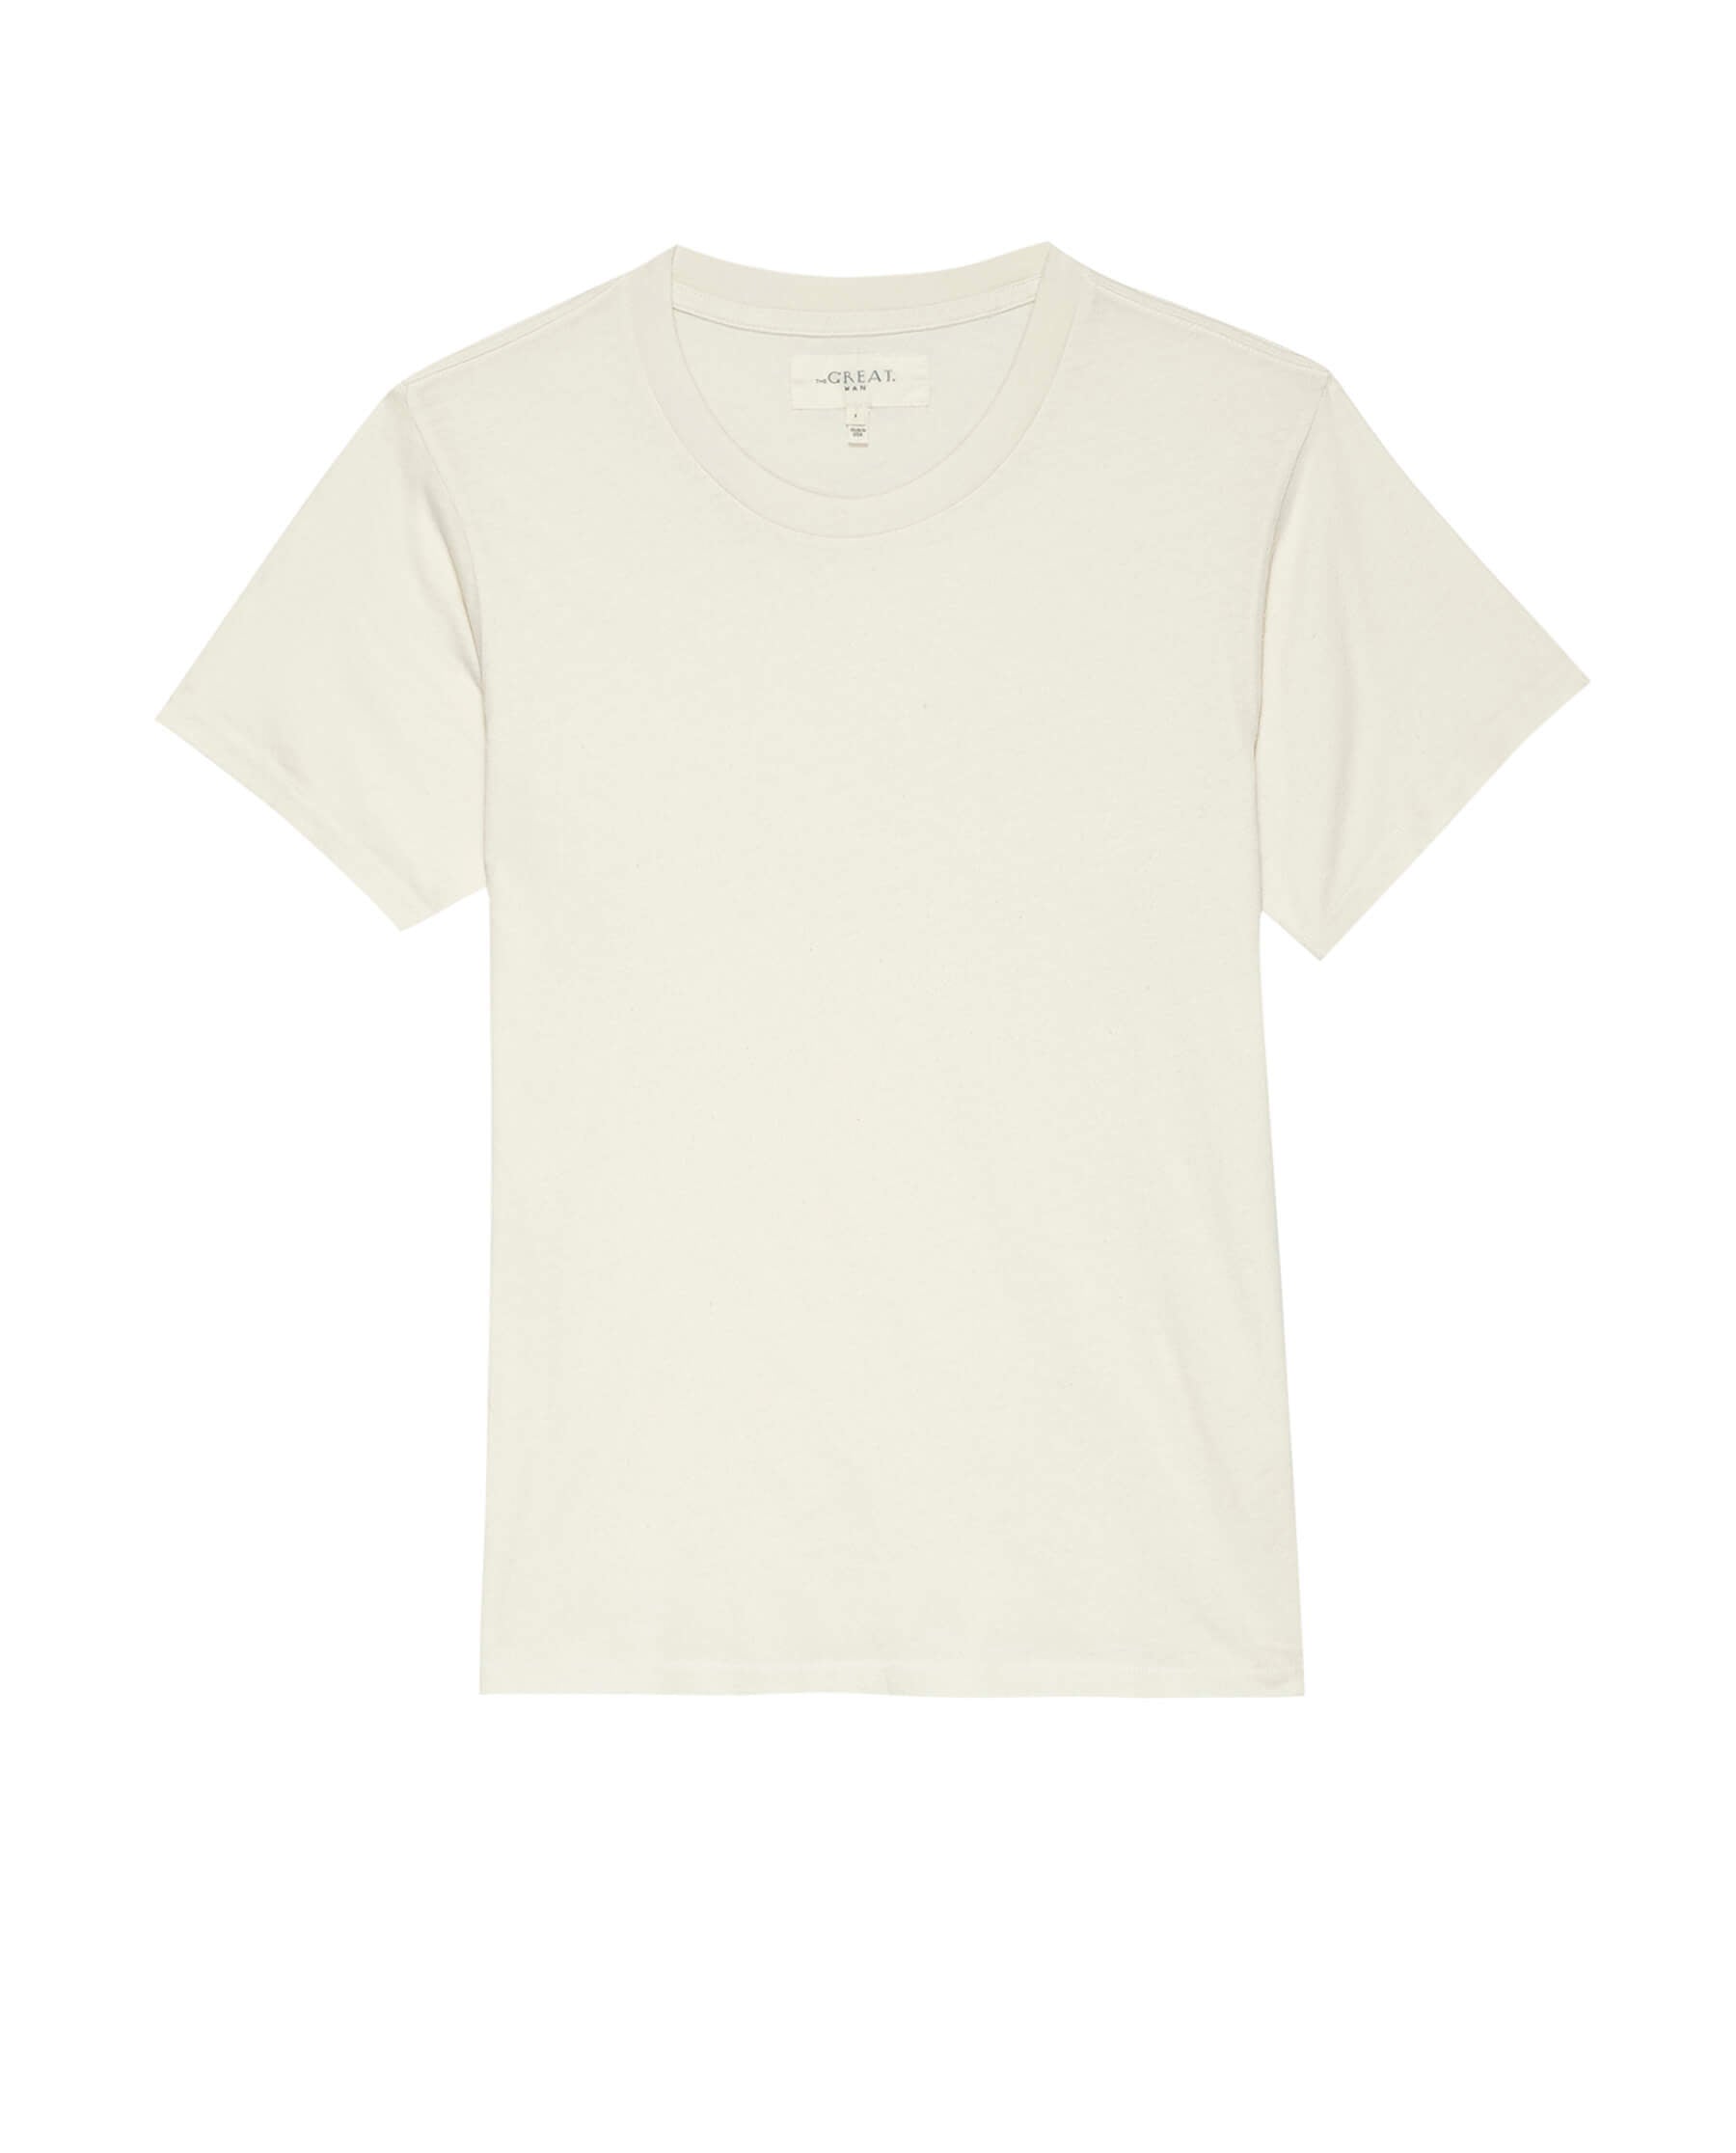 The Men's Slim Tee. -- Washed White